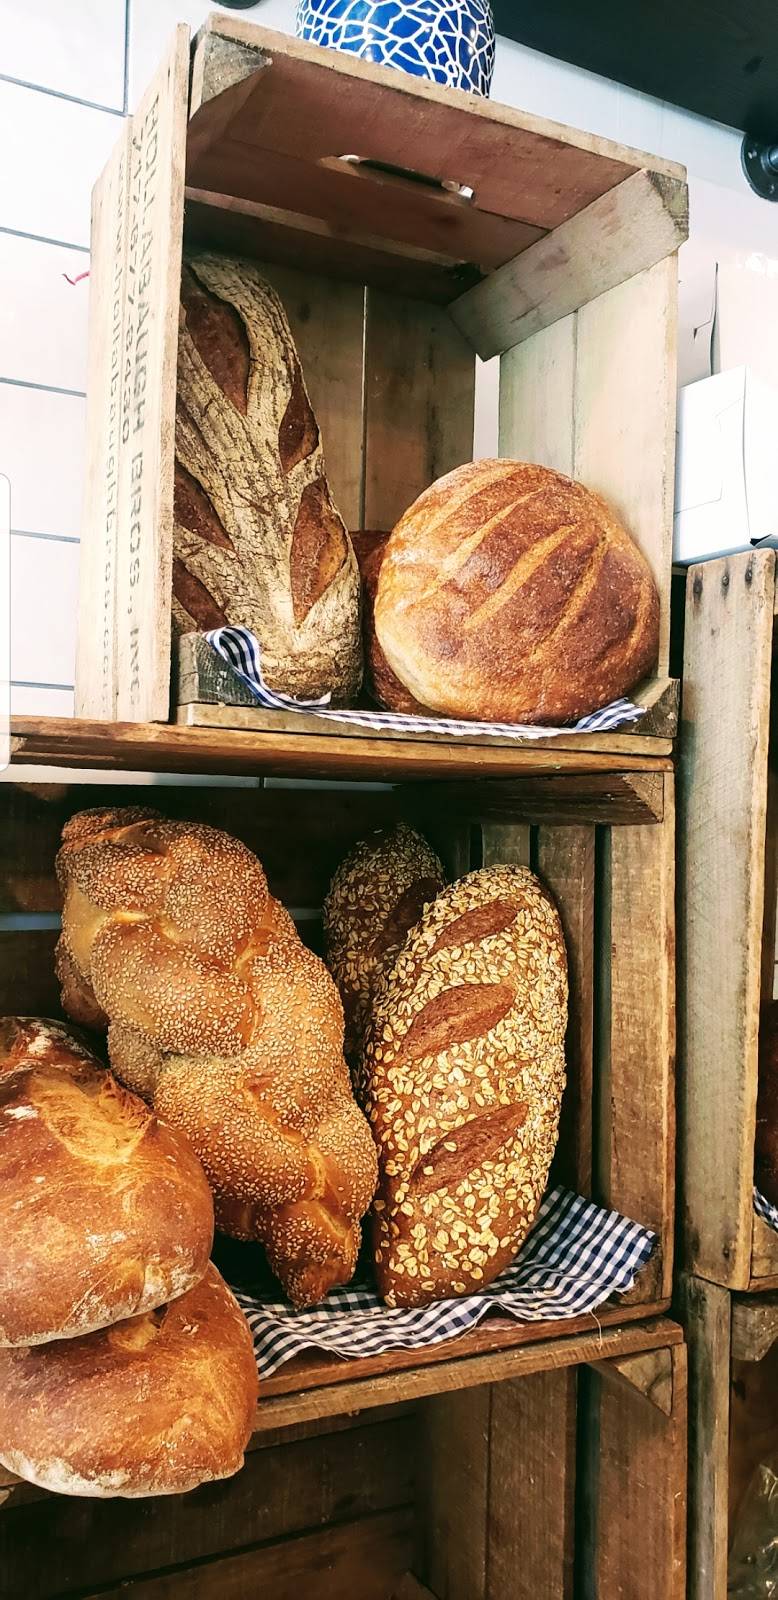 Emilias Bakehouse East Northport | bakery | 396 Larkfield Rd, East Northport, NY 11731, USA | 6314895355 OR +1 631-489-5355